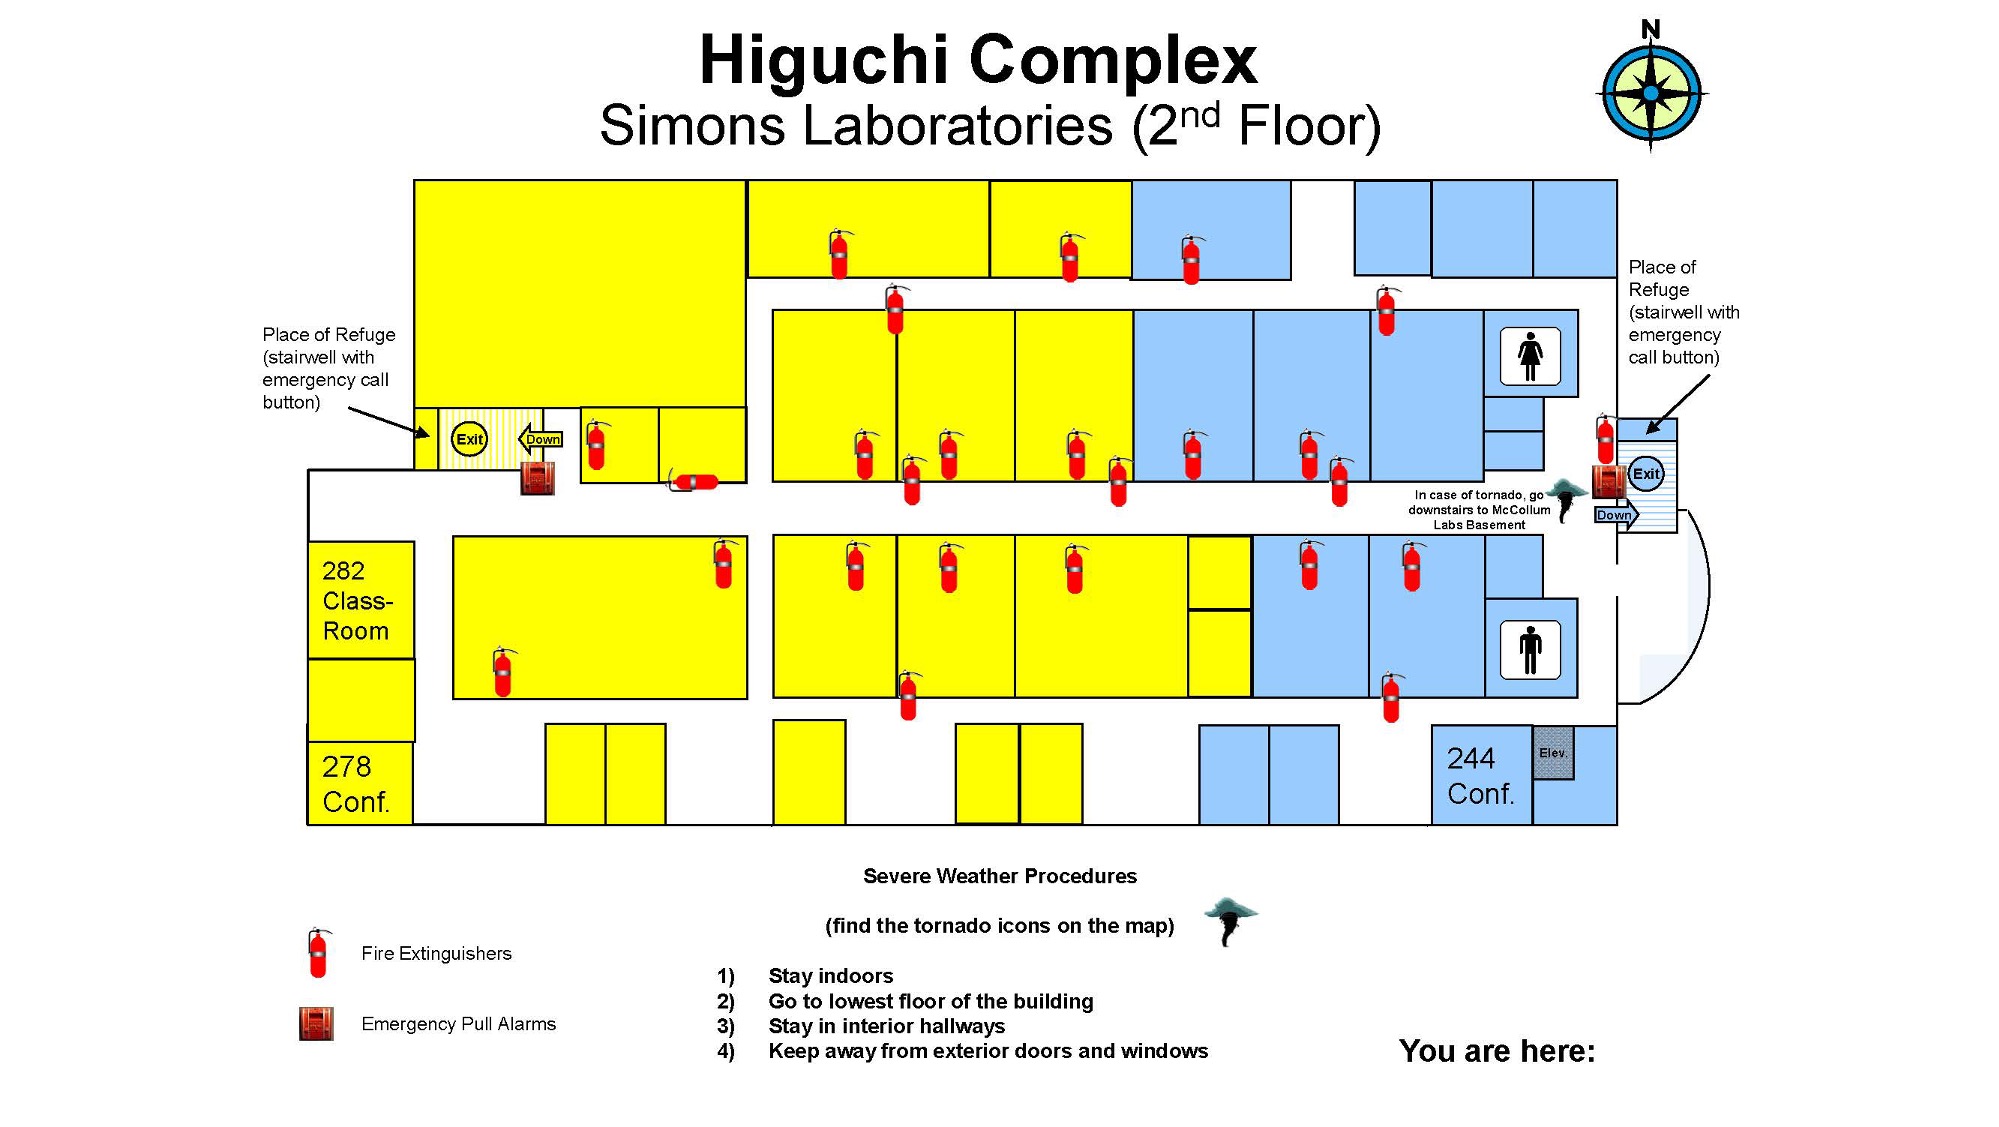 Map of the second floor of the Higuchi Complex Simons Laboratories